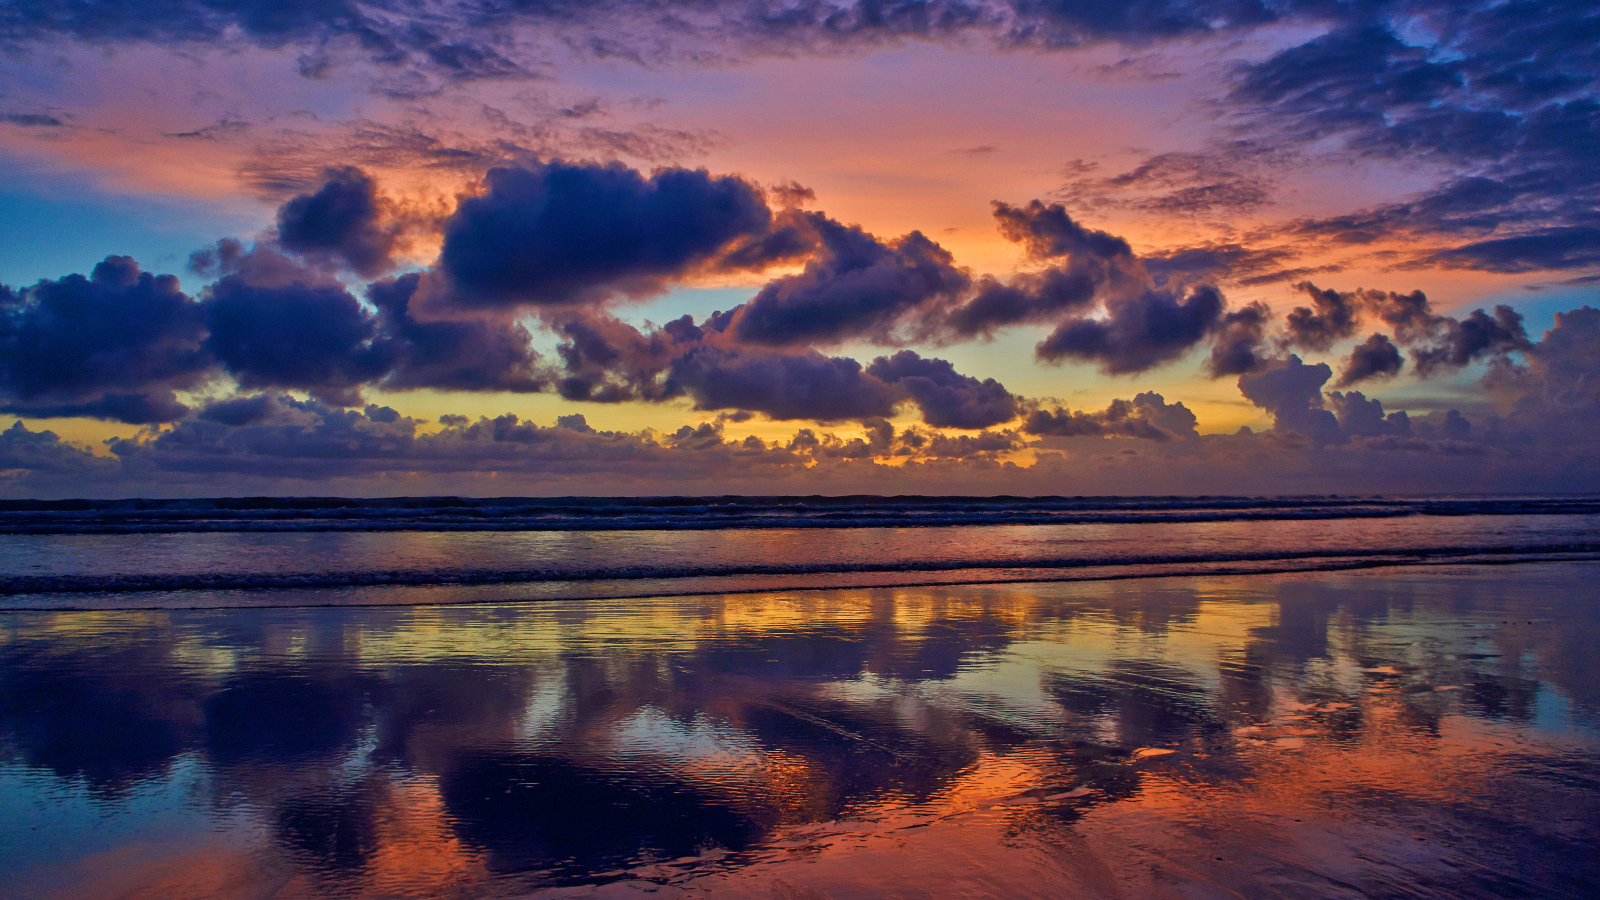 Black clouds reflected in sea water at sunset.